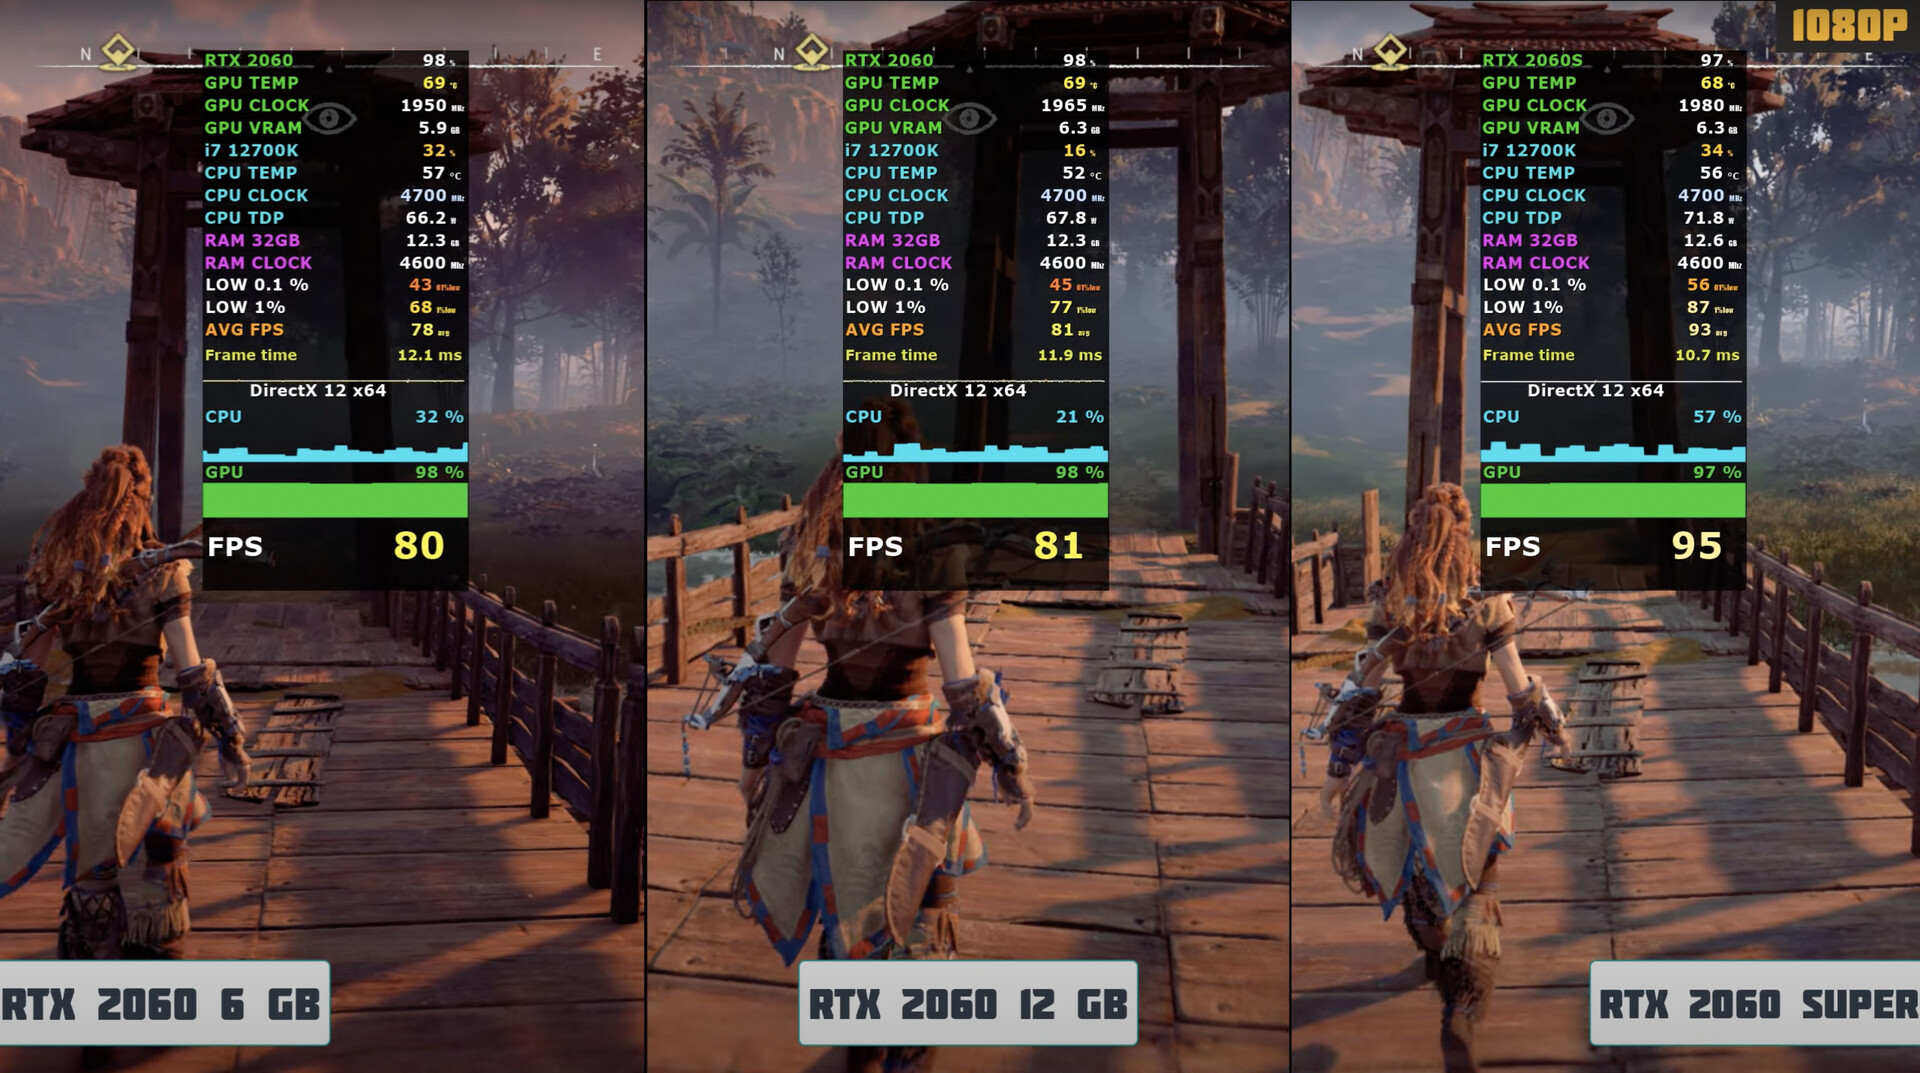 GeForce RTX 2060 (12 GB): Early gaming benchmark show NVIDIA's new €700 desktop graphics card is consistently slower than the RTX 2060 SUPER - NotebookCheck.net